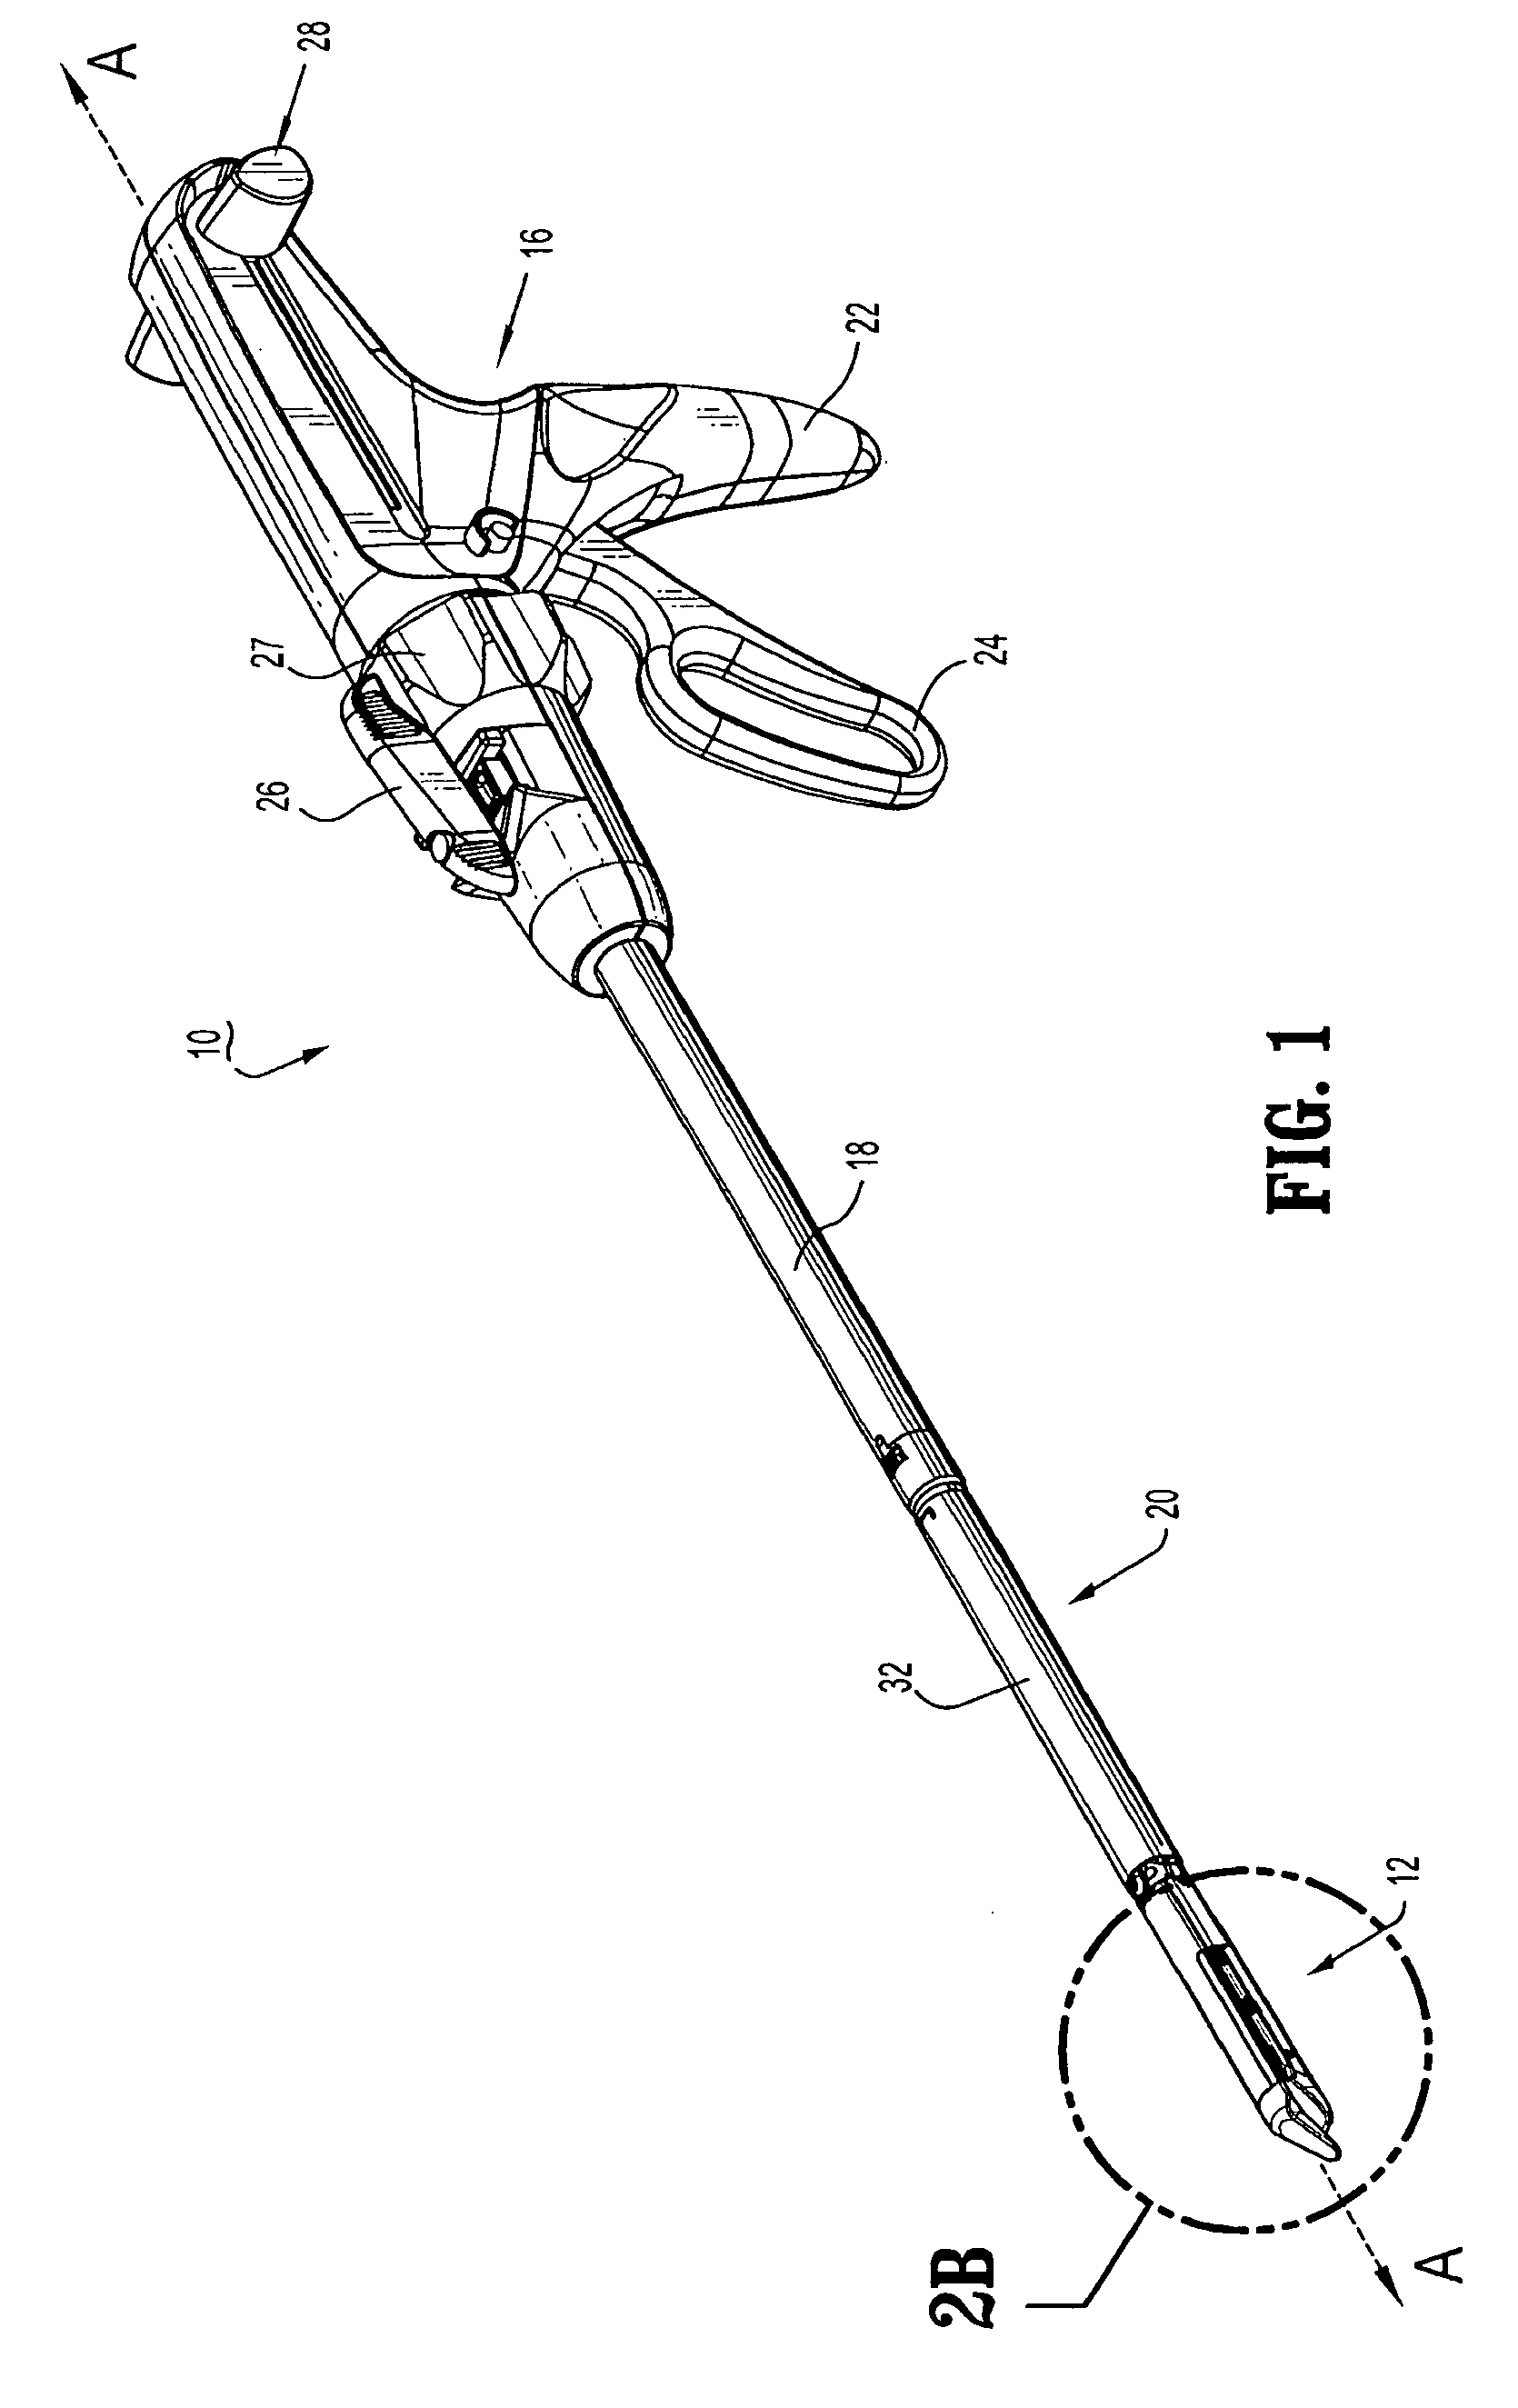 Anvil-mounted dissecting tip for surgical stapling device